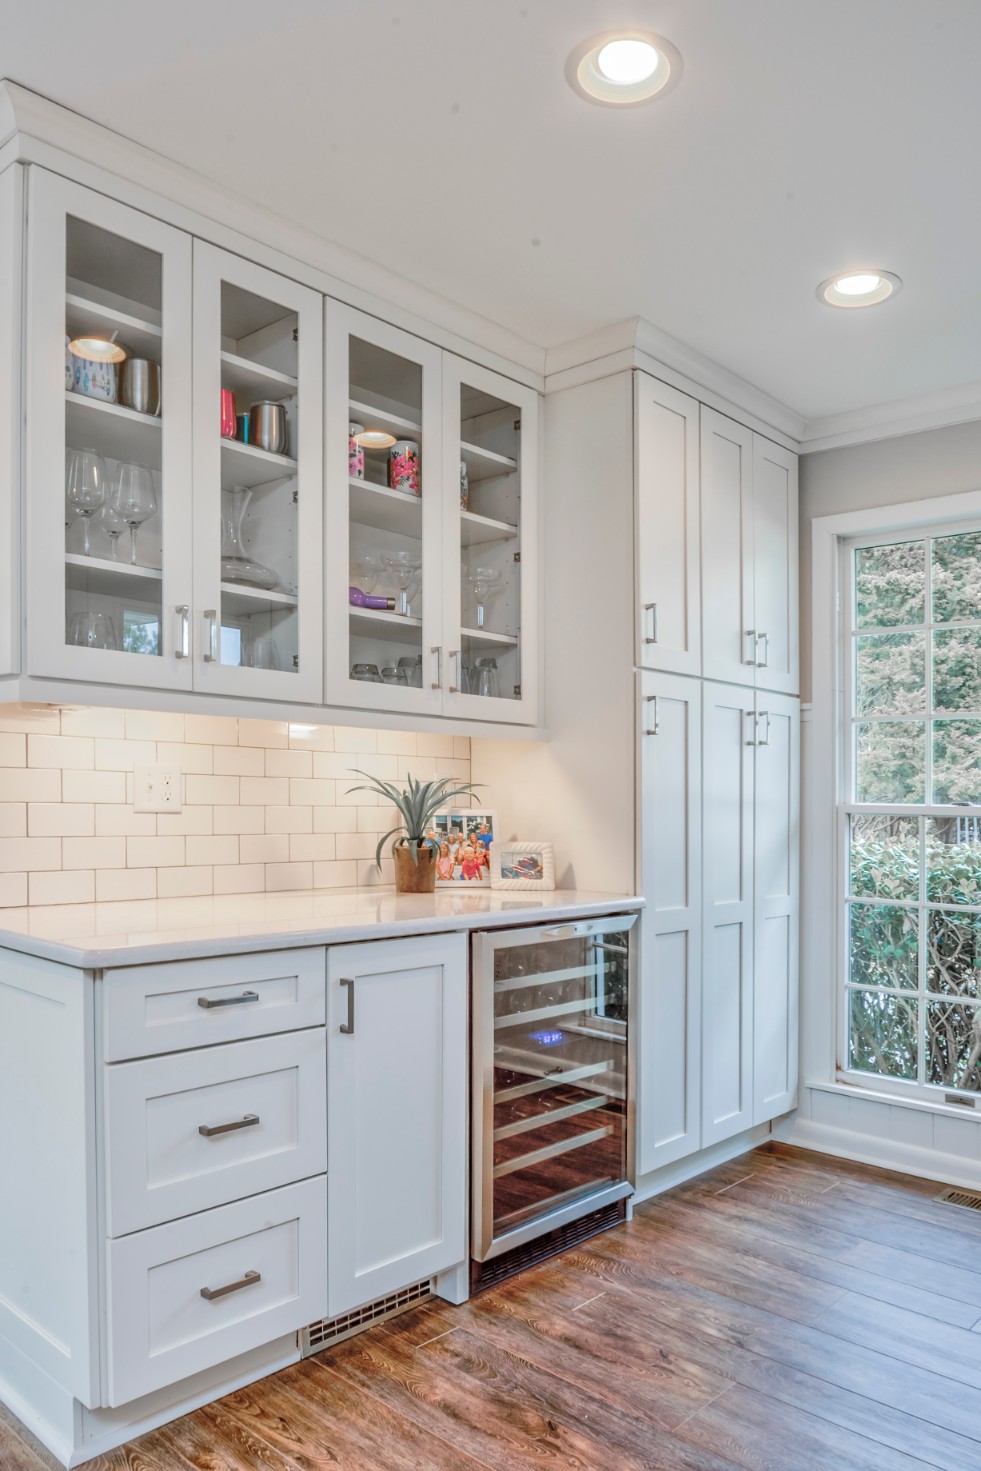 Canal Way Kitchen Remodel in Bethany Beach DE with Wine Cooler, White Cabinets and White Subway Tile Backsplash